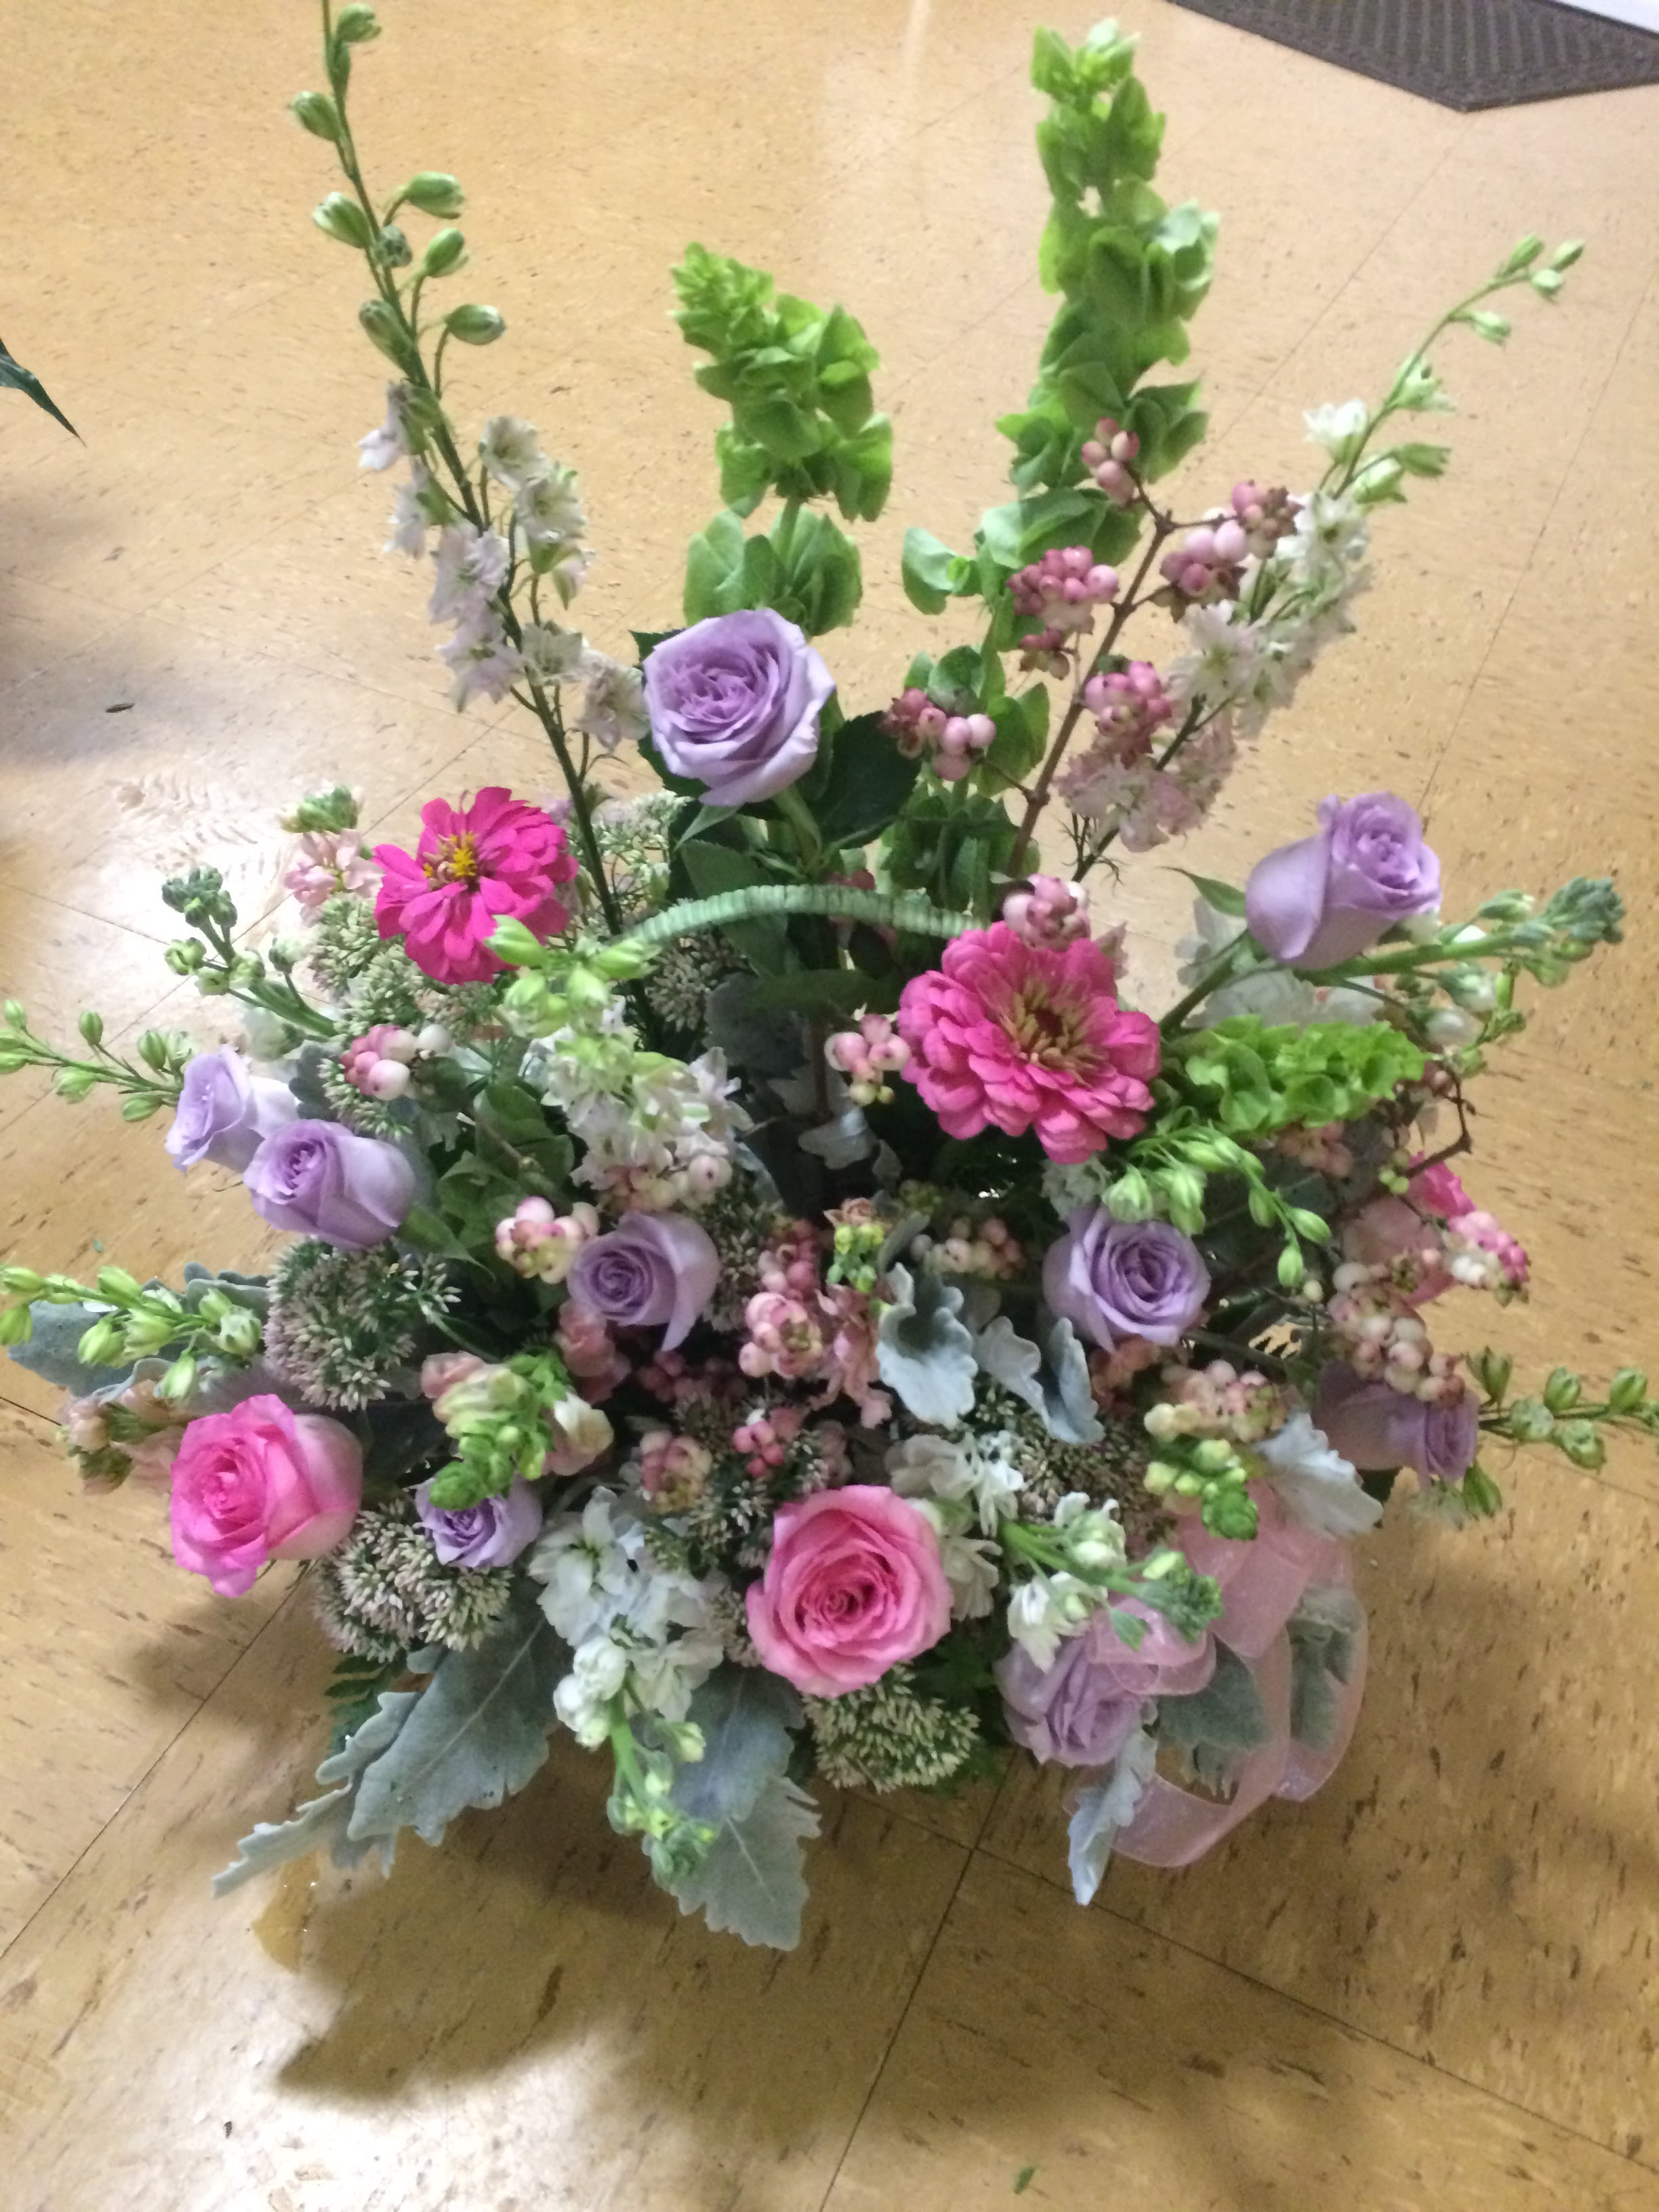 Spring Fling - A soft pastel palette with roses, delphinium, bells of Ireland. A basket arrangemet, that can be used as an alter arrangement for a wedding, or sent as a sympathy tribute.